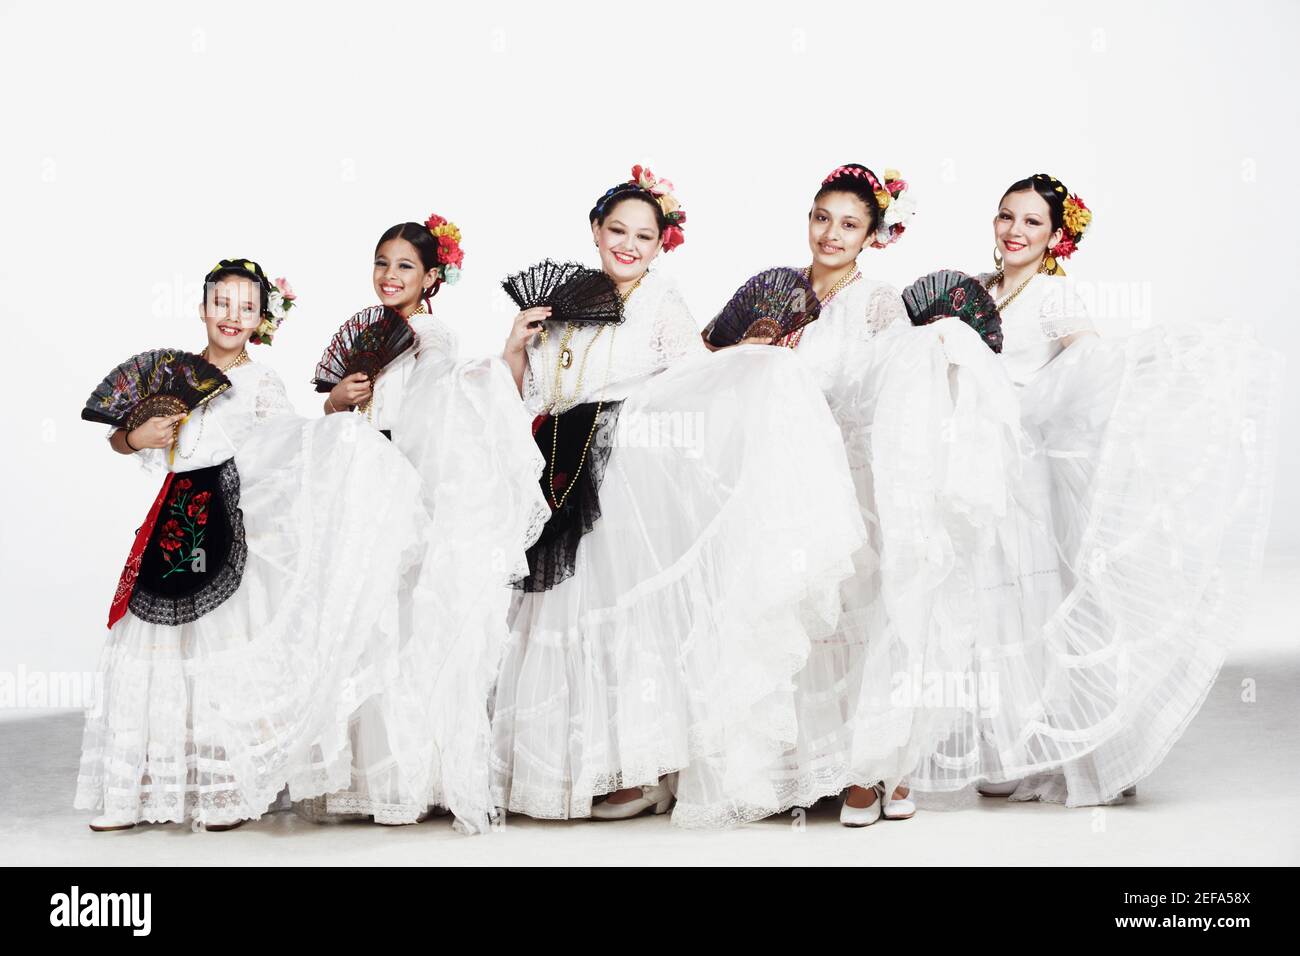 Portrait of a group of female dancers holding folding fans Stock Photo